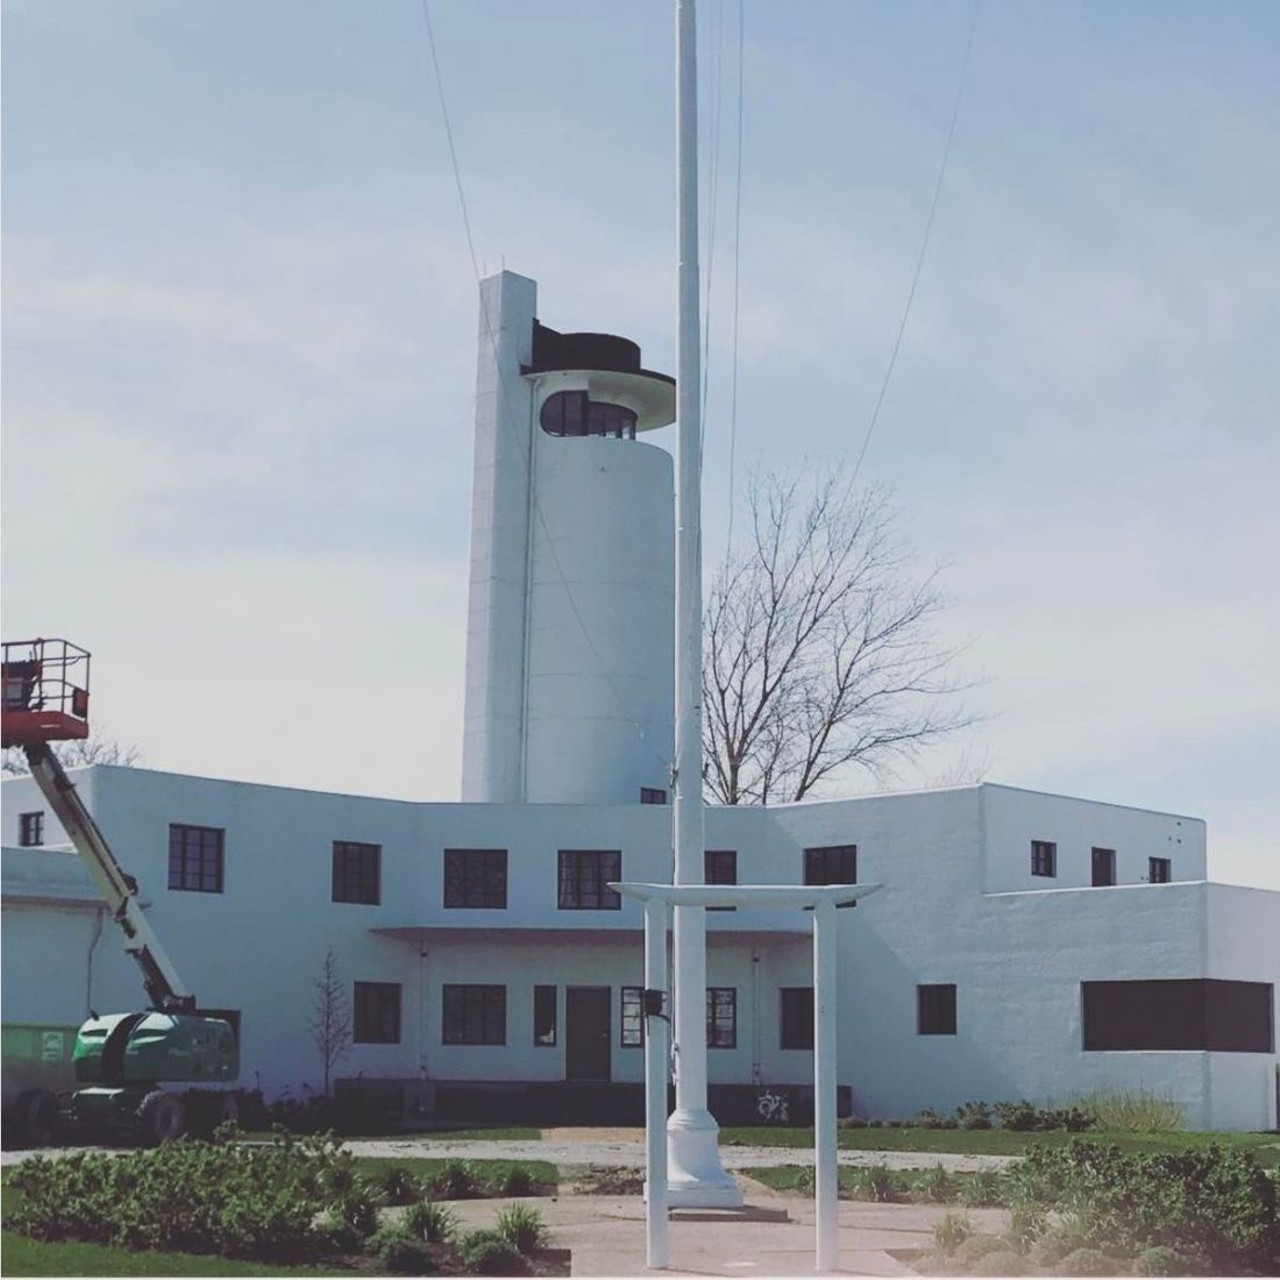 Historic Coast Guard Station
216-904-9456, 2800 Whiskey Island Dr.
Located in Whiskey Island and Wendy Park, the Cleveland Metroparks acquired the station last year and gave it a facelift. Check out renovations and beautiful new foliage any time this summer.
Photo via leo.rarity/Instagram